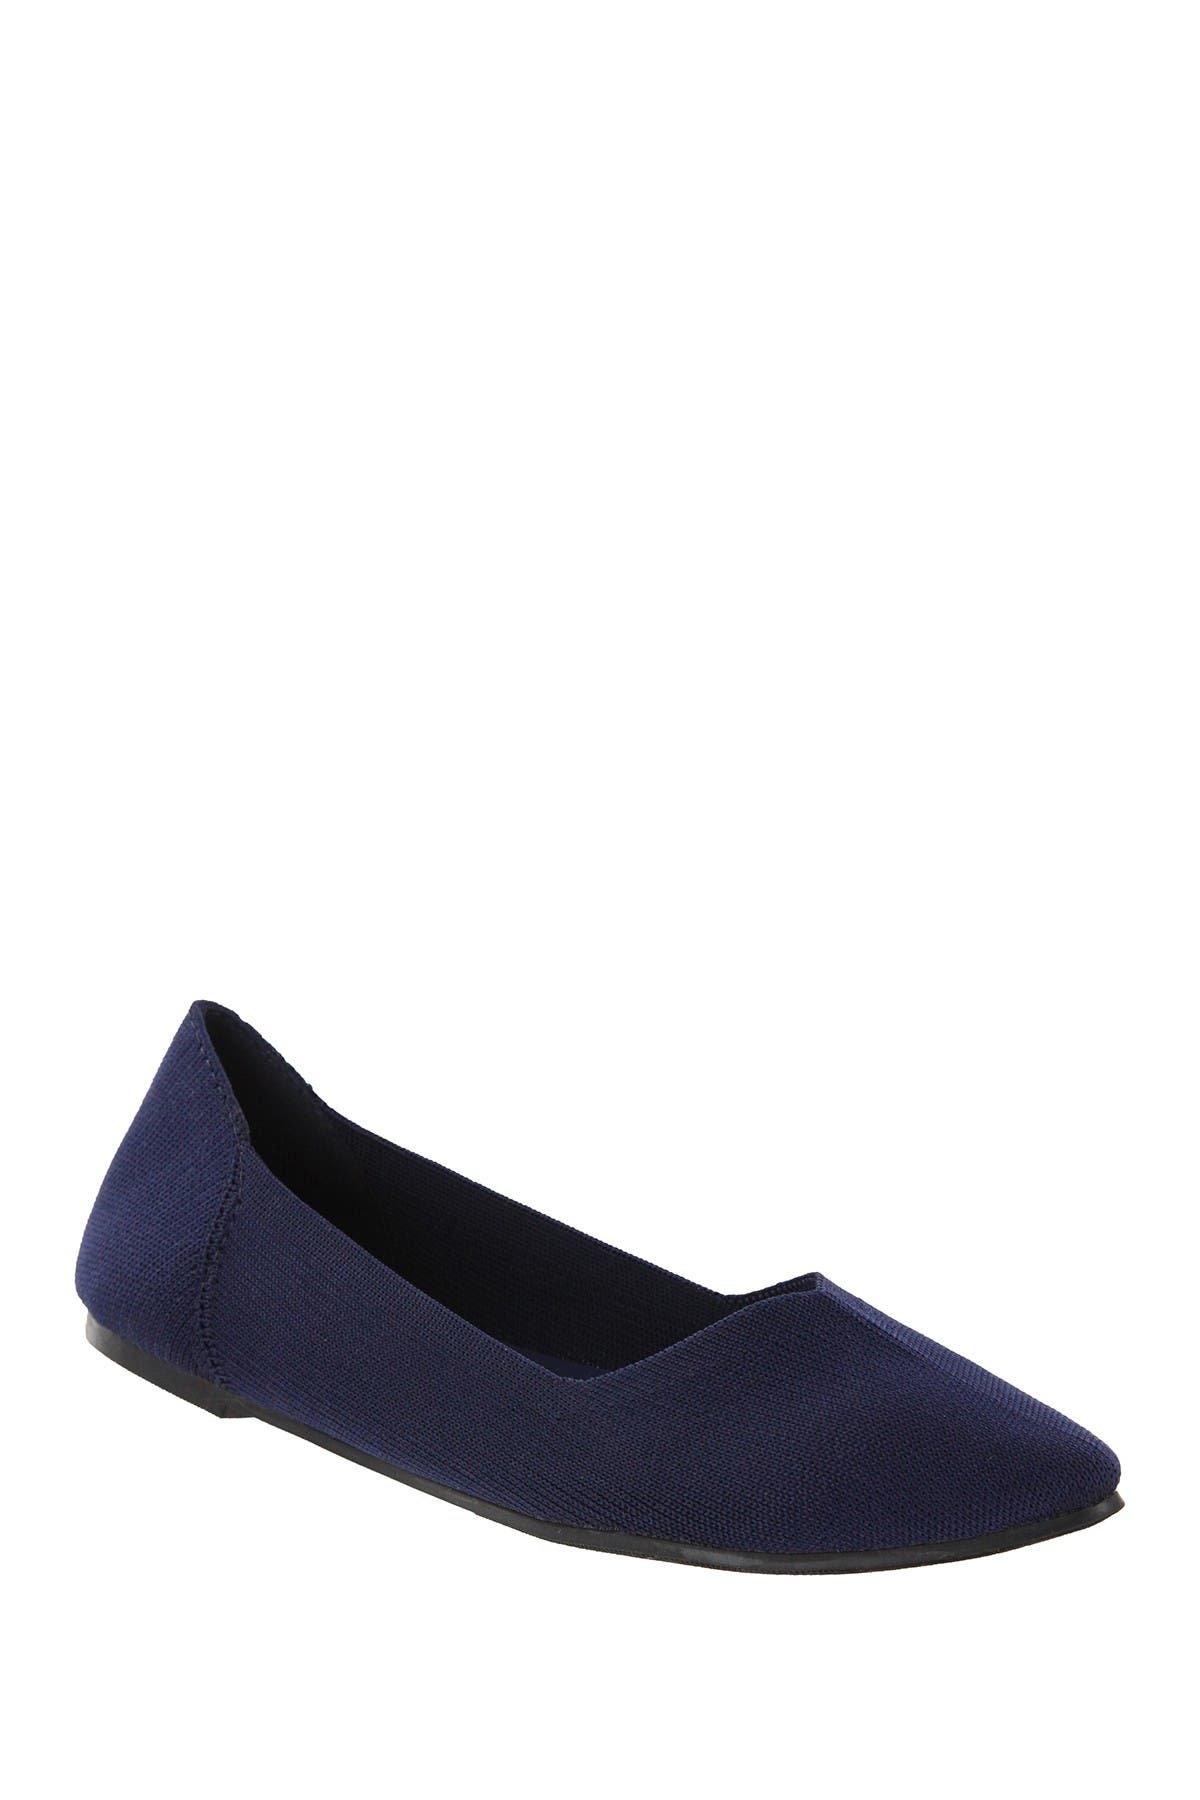 rothy flats nordstrom